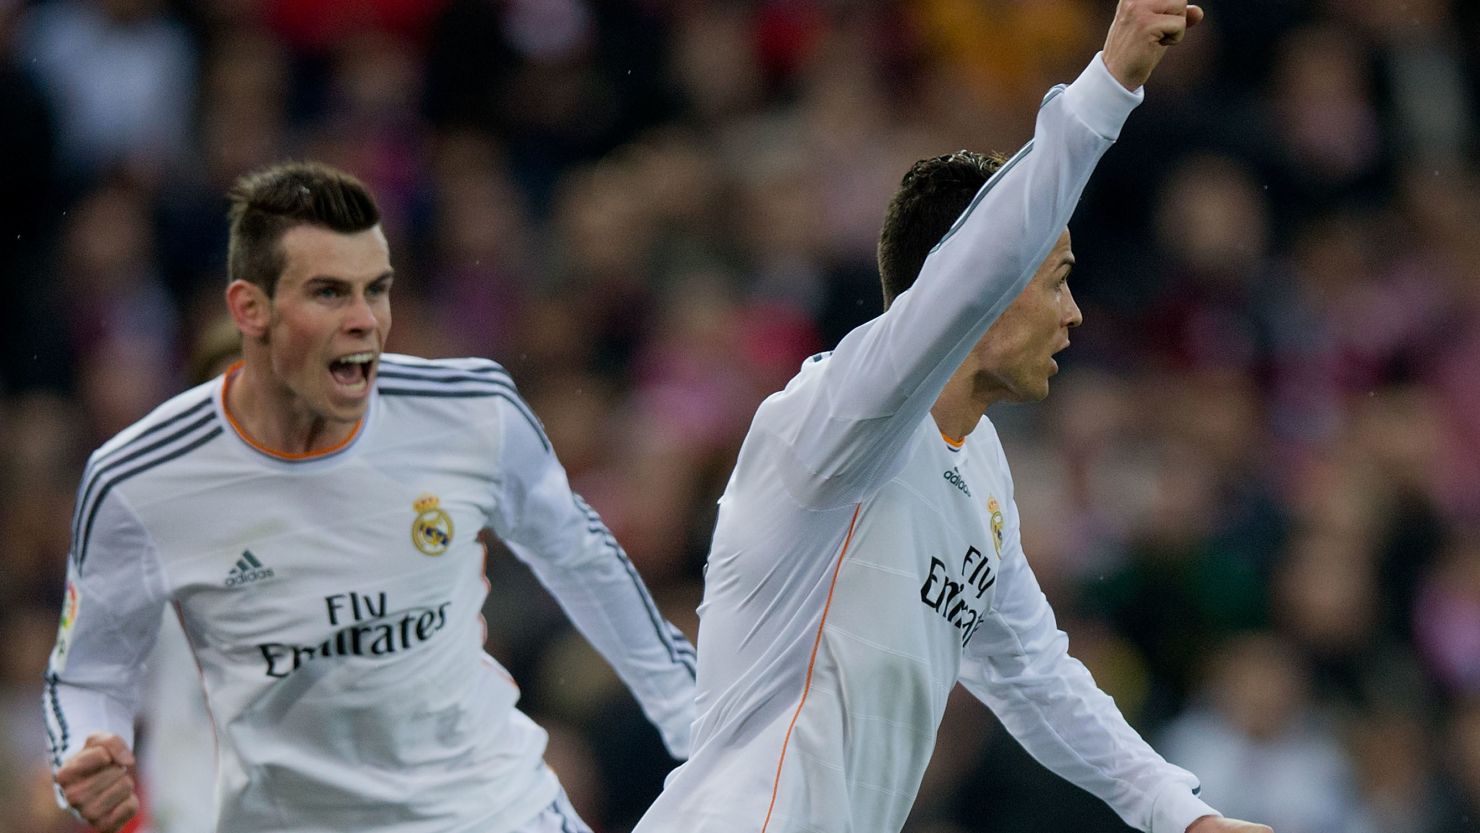 Cristiano Ronaldo celebrates with Gareth Bale in close attendance as he equalizes for Real Madrid.